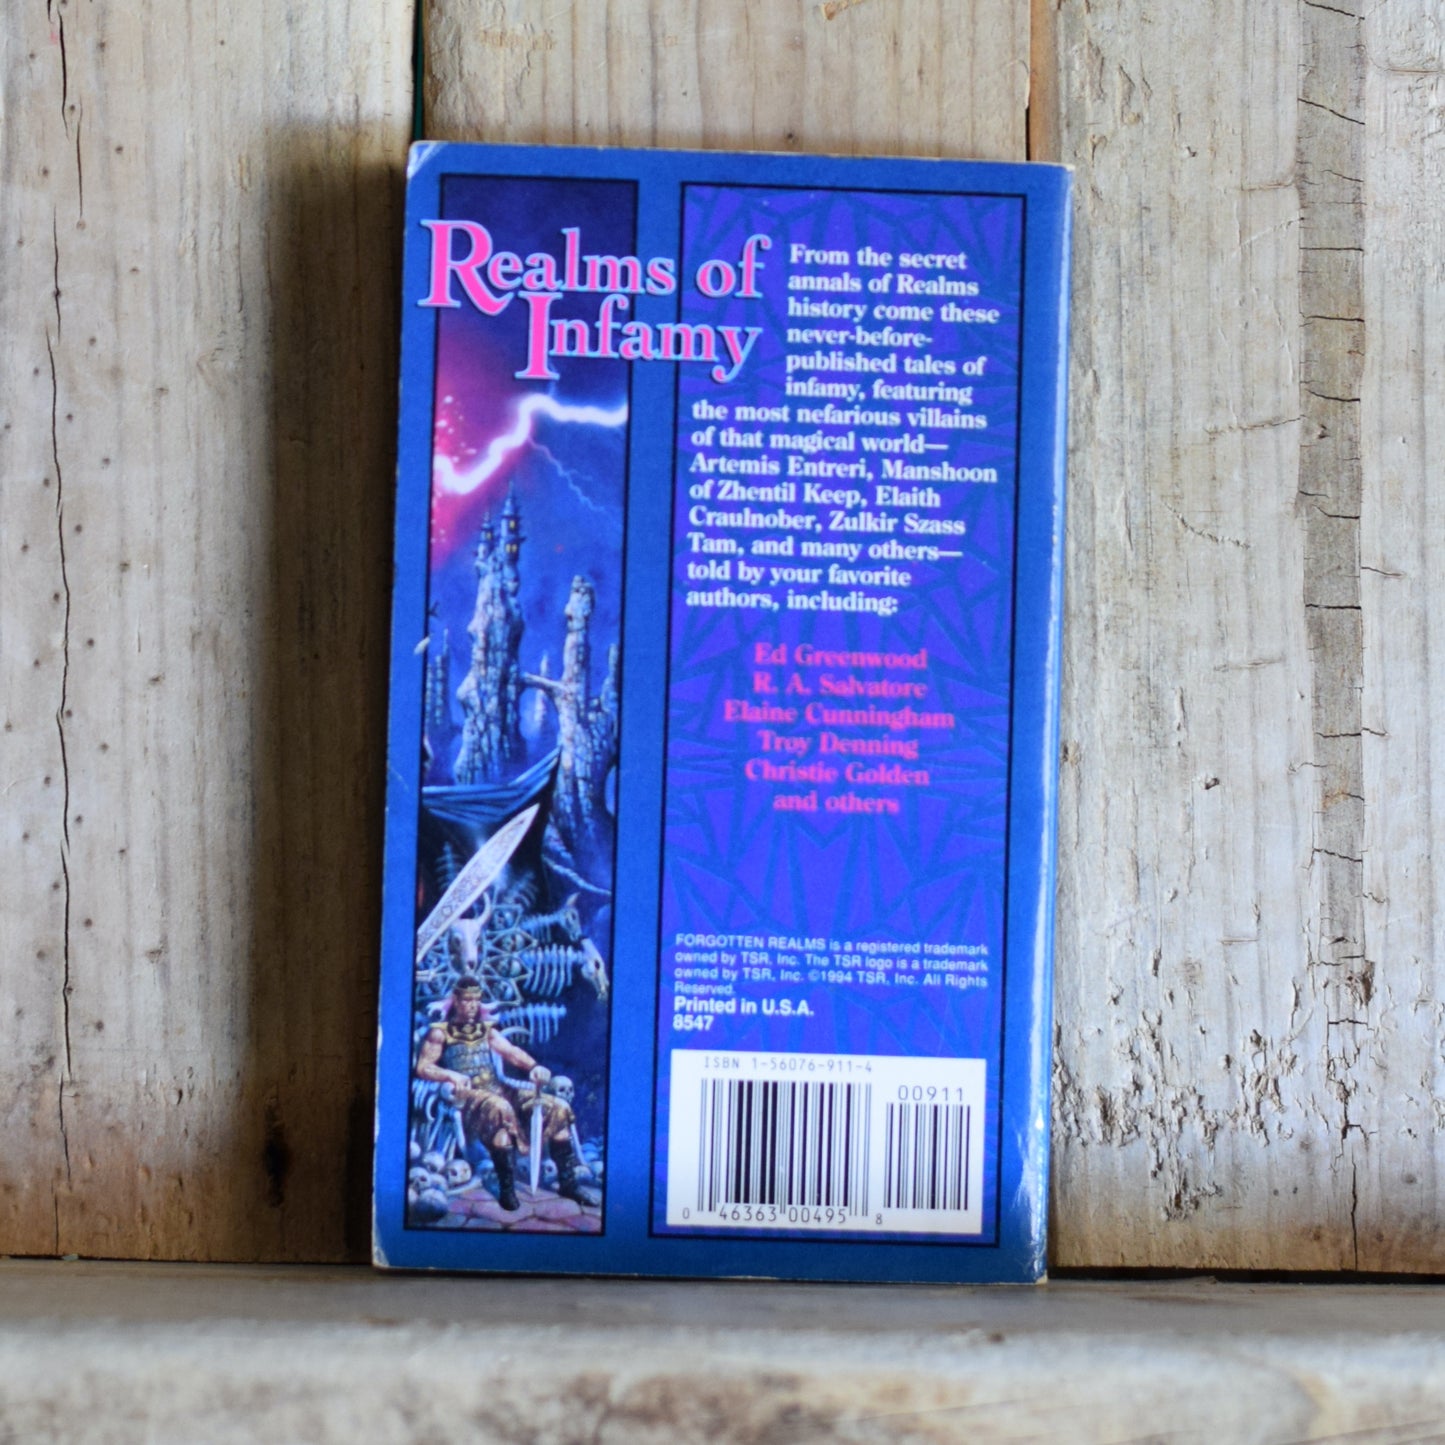 Vintage Dungeons and Dragons Paperback: Realms of Infamy - Edited by James Lowder FIRST PRINTING